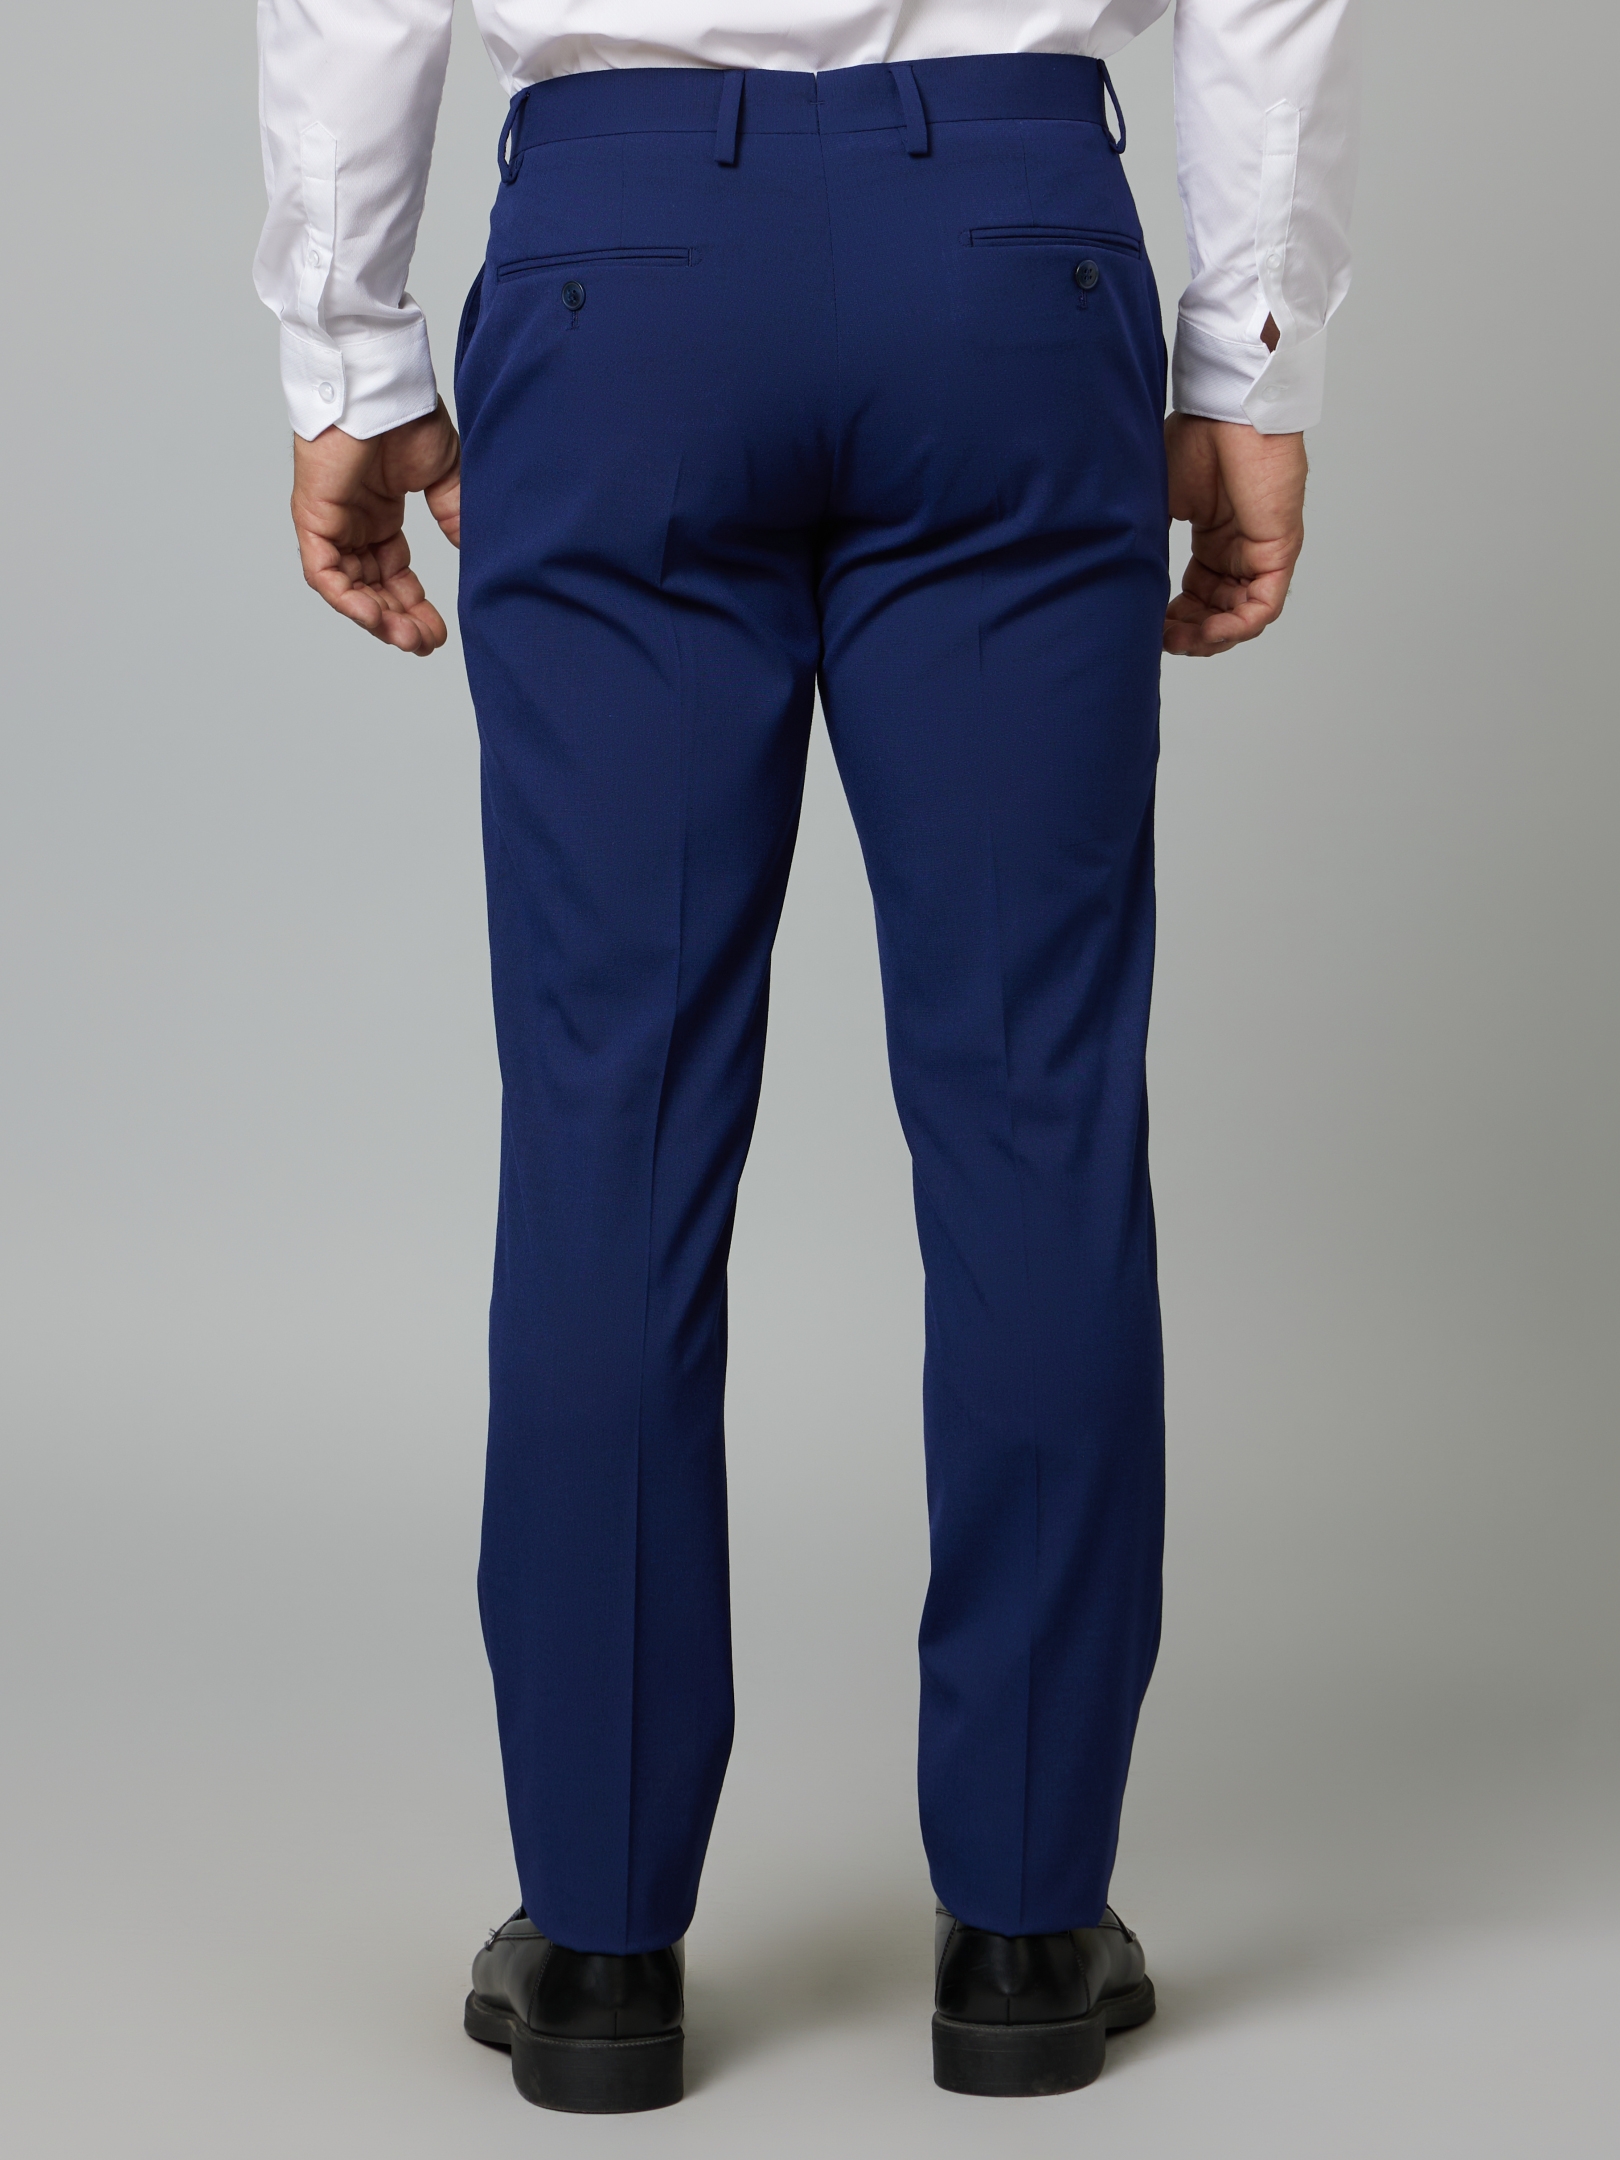 Buy Trousers For Women/Ladies Online In India At Best Price | NNNOW